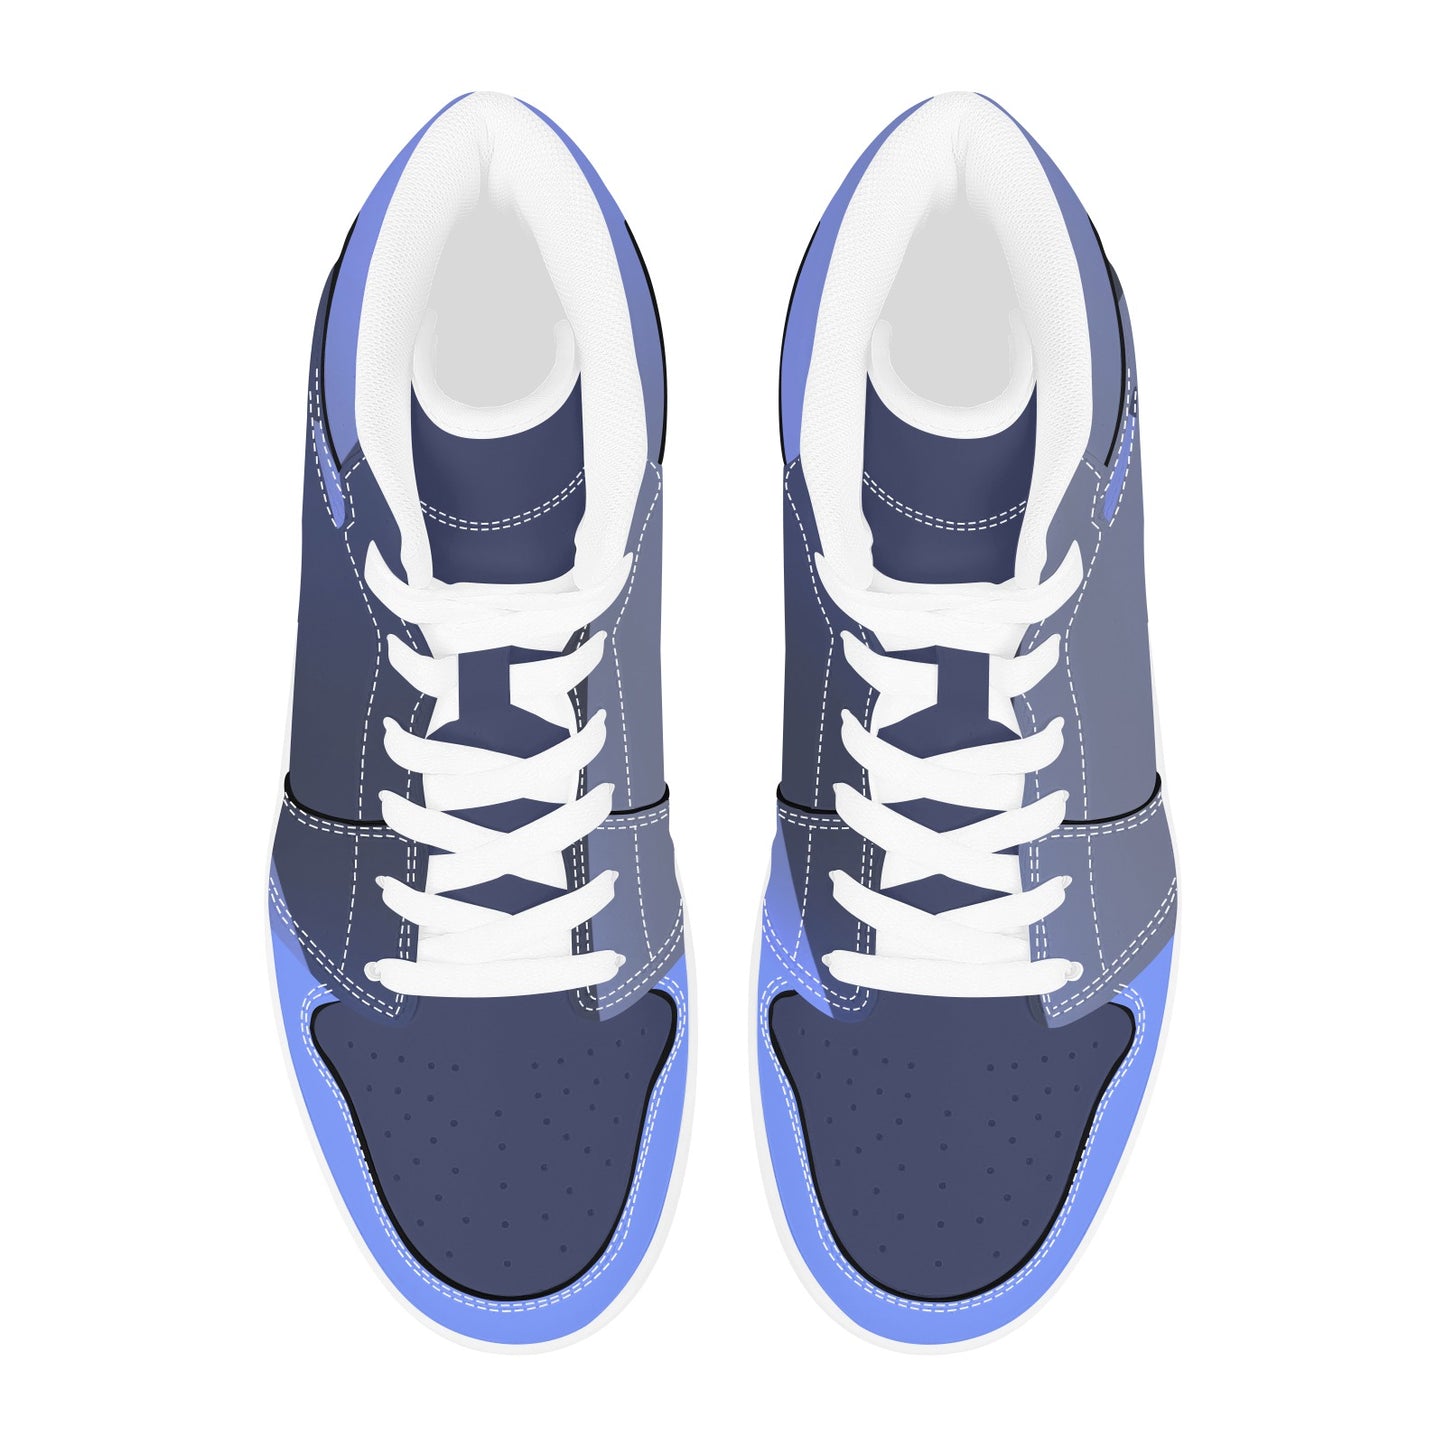 Blue High Top Sneakers Blue Colors High Top Sneakers Men's High Top Sneakers